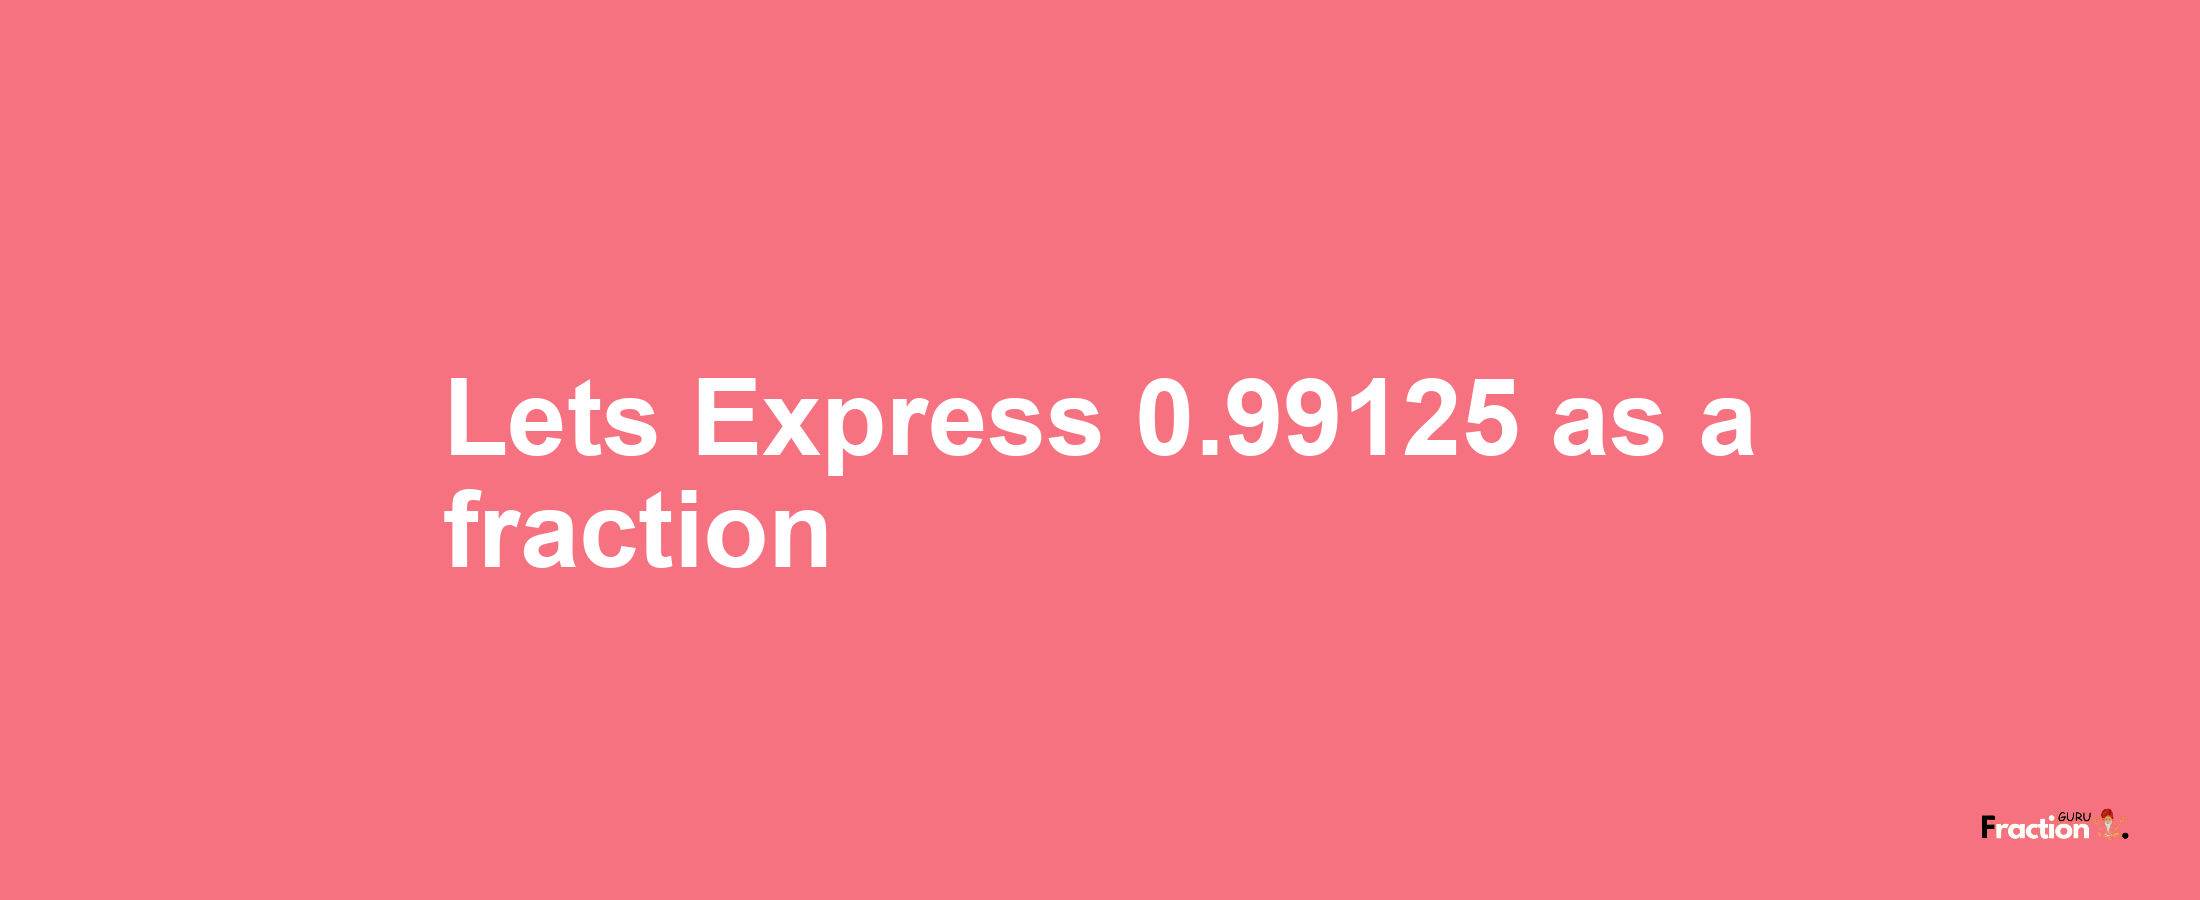 Lets Express 0.99125 as afraction